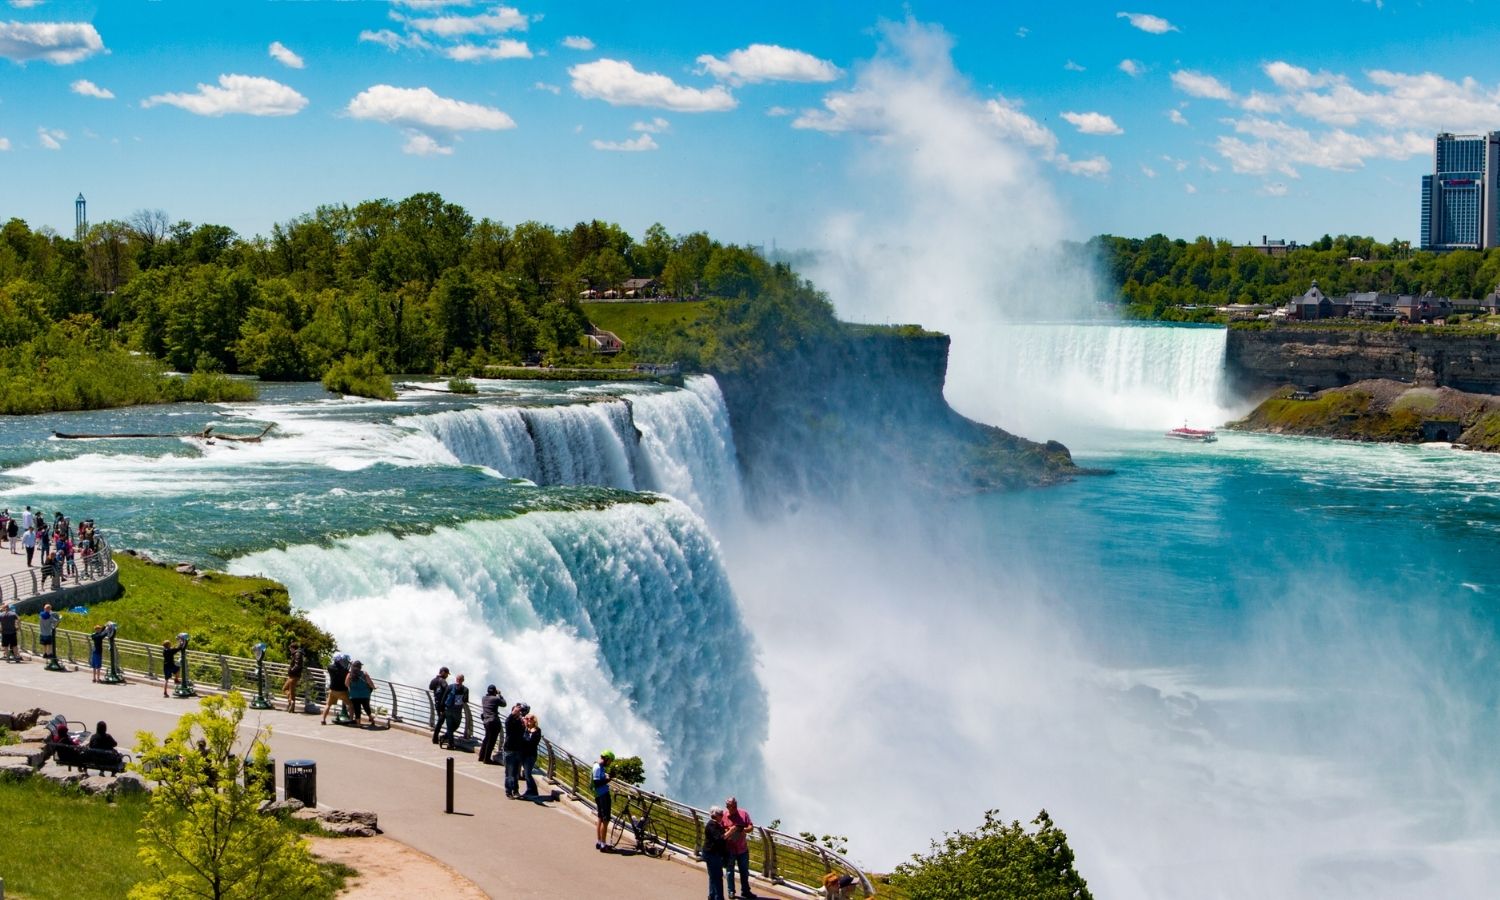 OTD in 1903: The iconic Niagara Falls waterfall ran out of water during a drought.